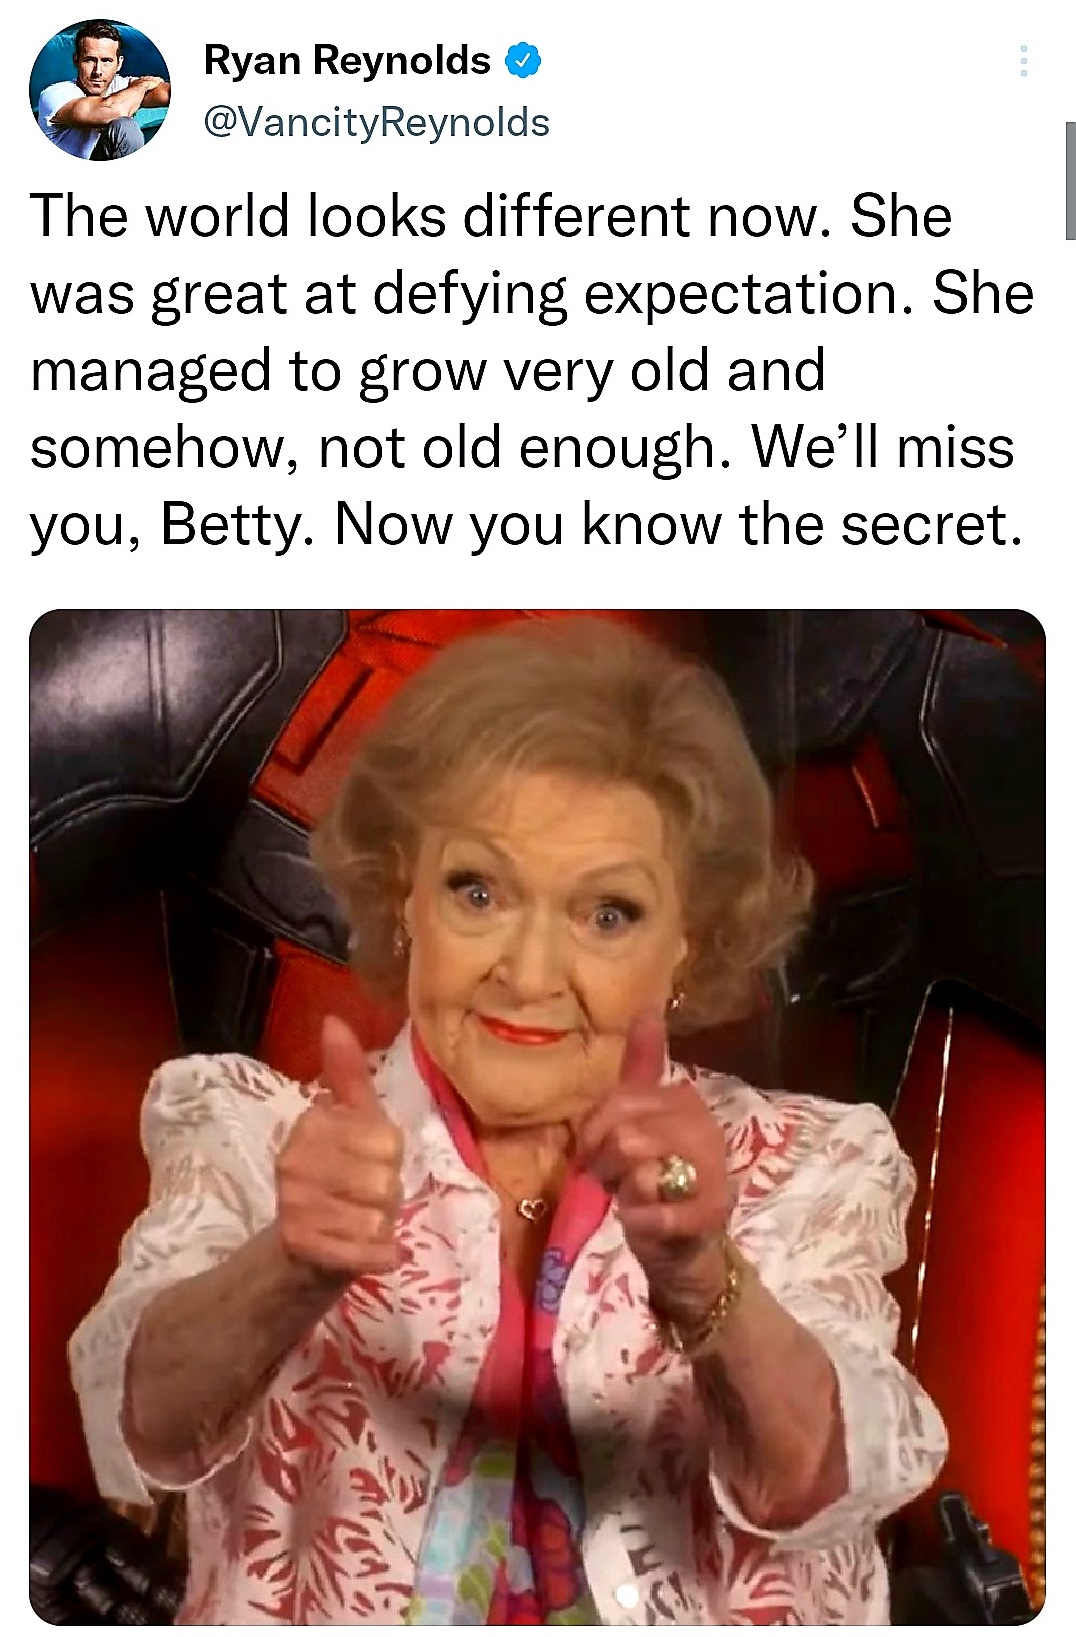 A tweet by Ryan Reynolds with the text: The world looks different now. She was great at defying expectation. She managed to grow very old and somehow, not old enough. We'll miss you, Betty. Now you know the secret. A photograph of Betty White. 